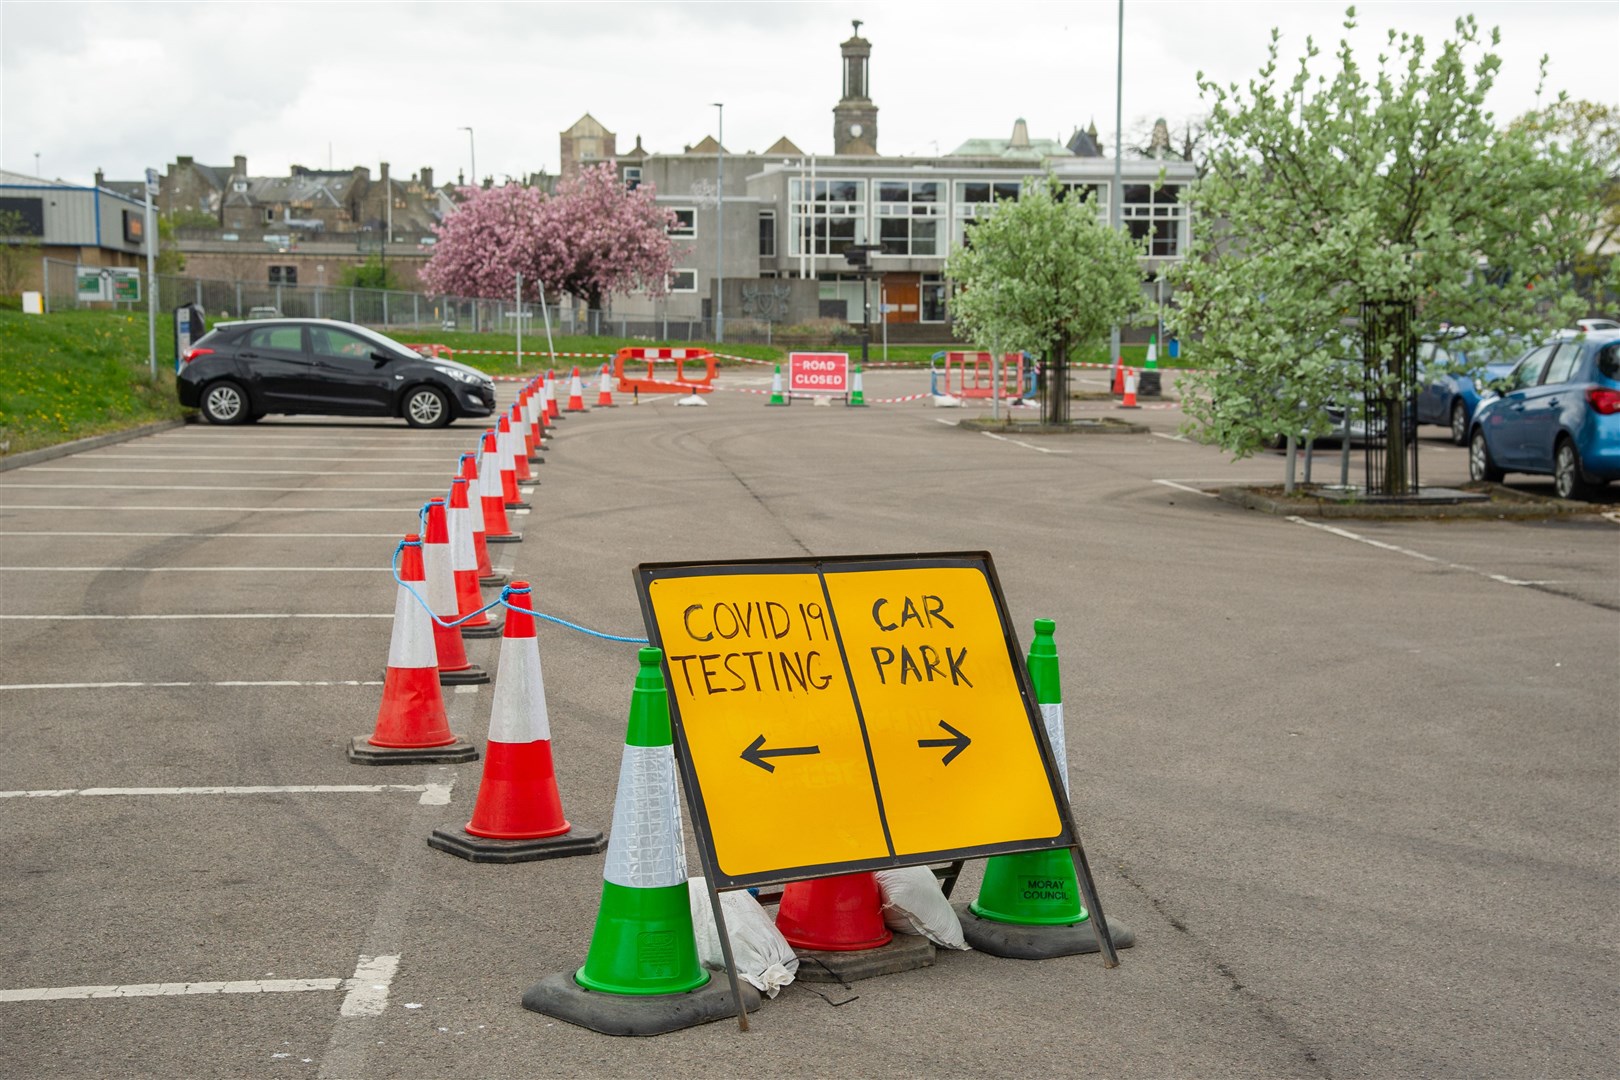 A coronavirus testing centre has been set up in the Lossie Green car park, in Elgin. Picture: Daniel Forsyth.